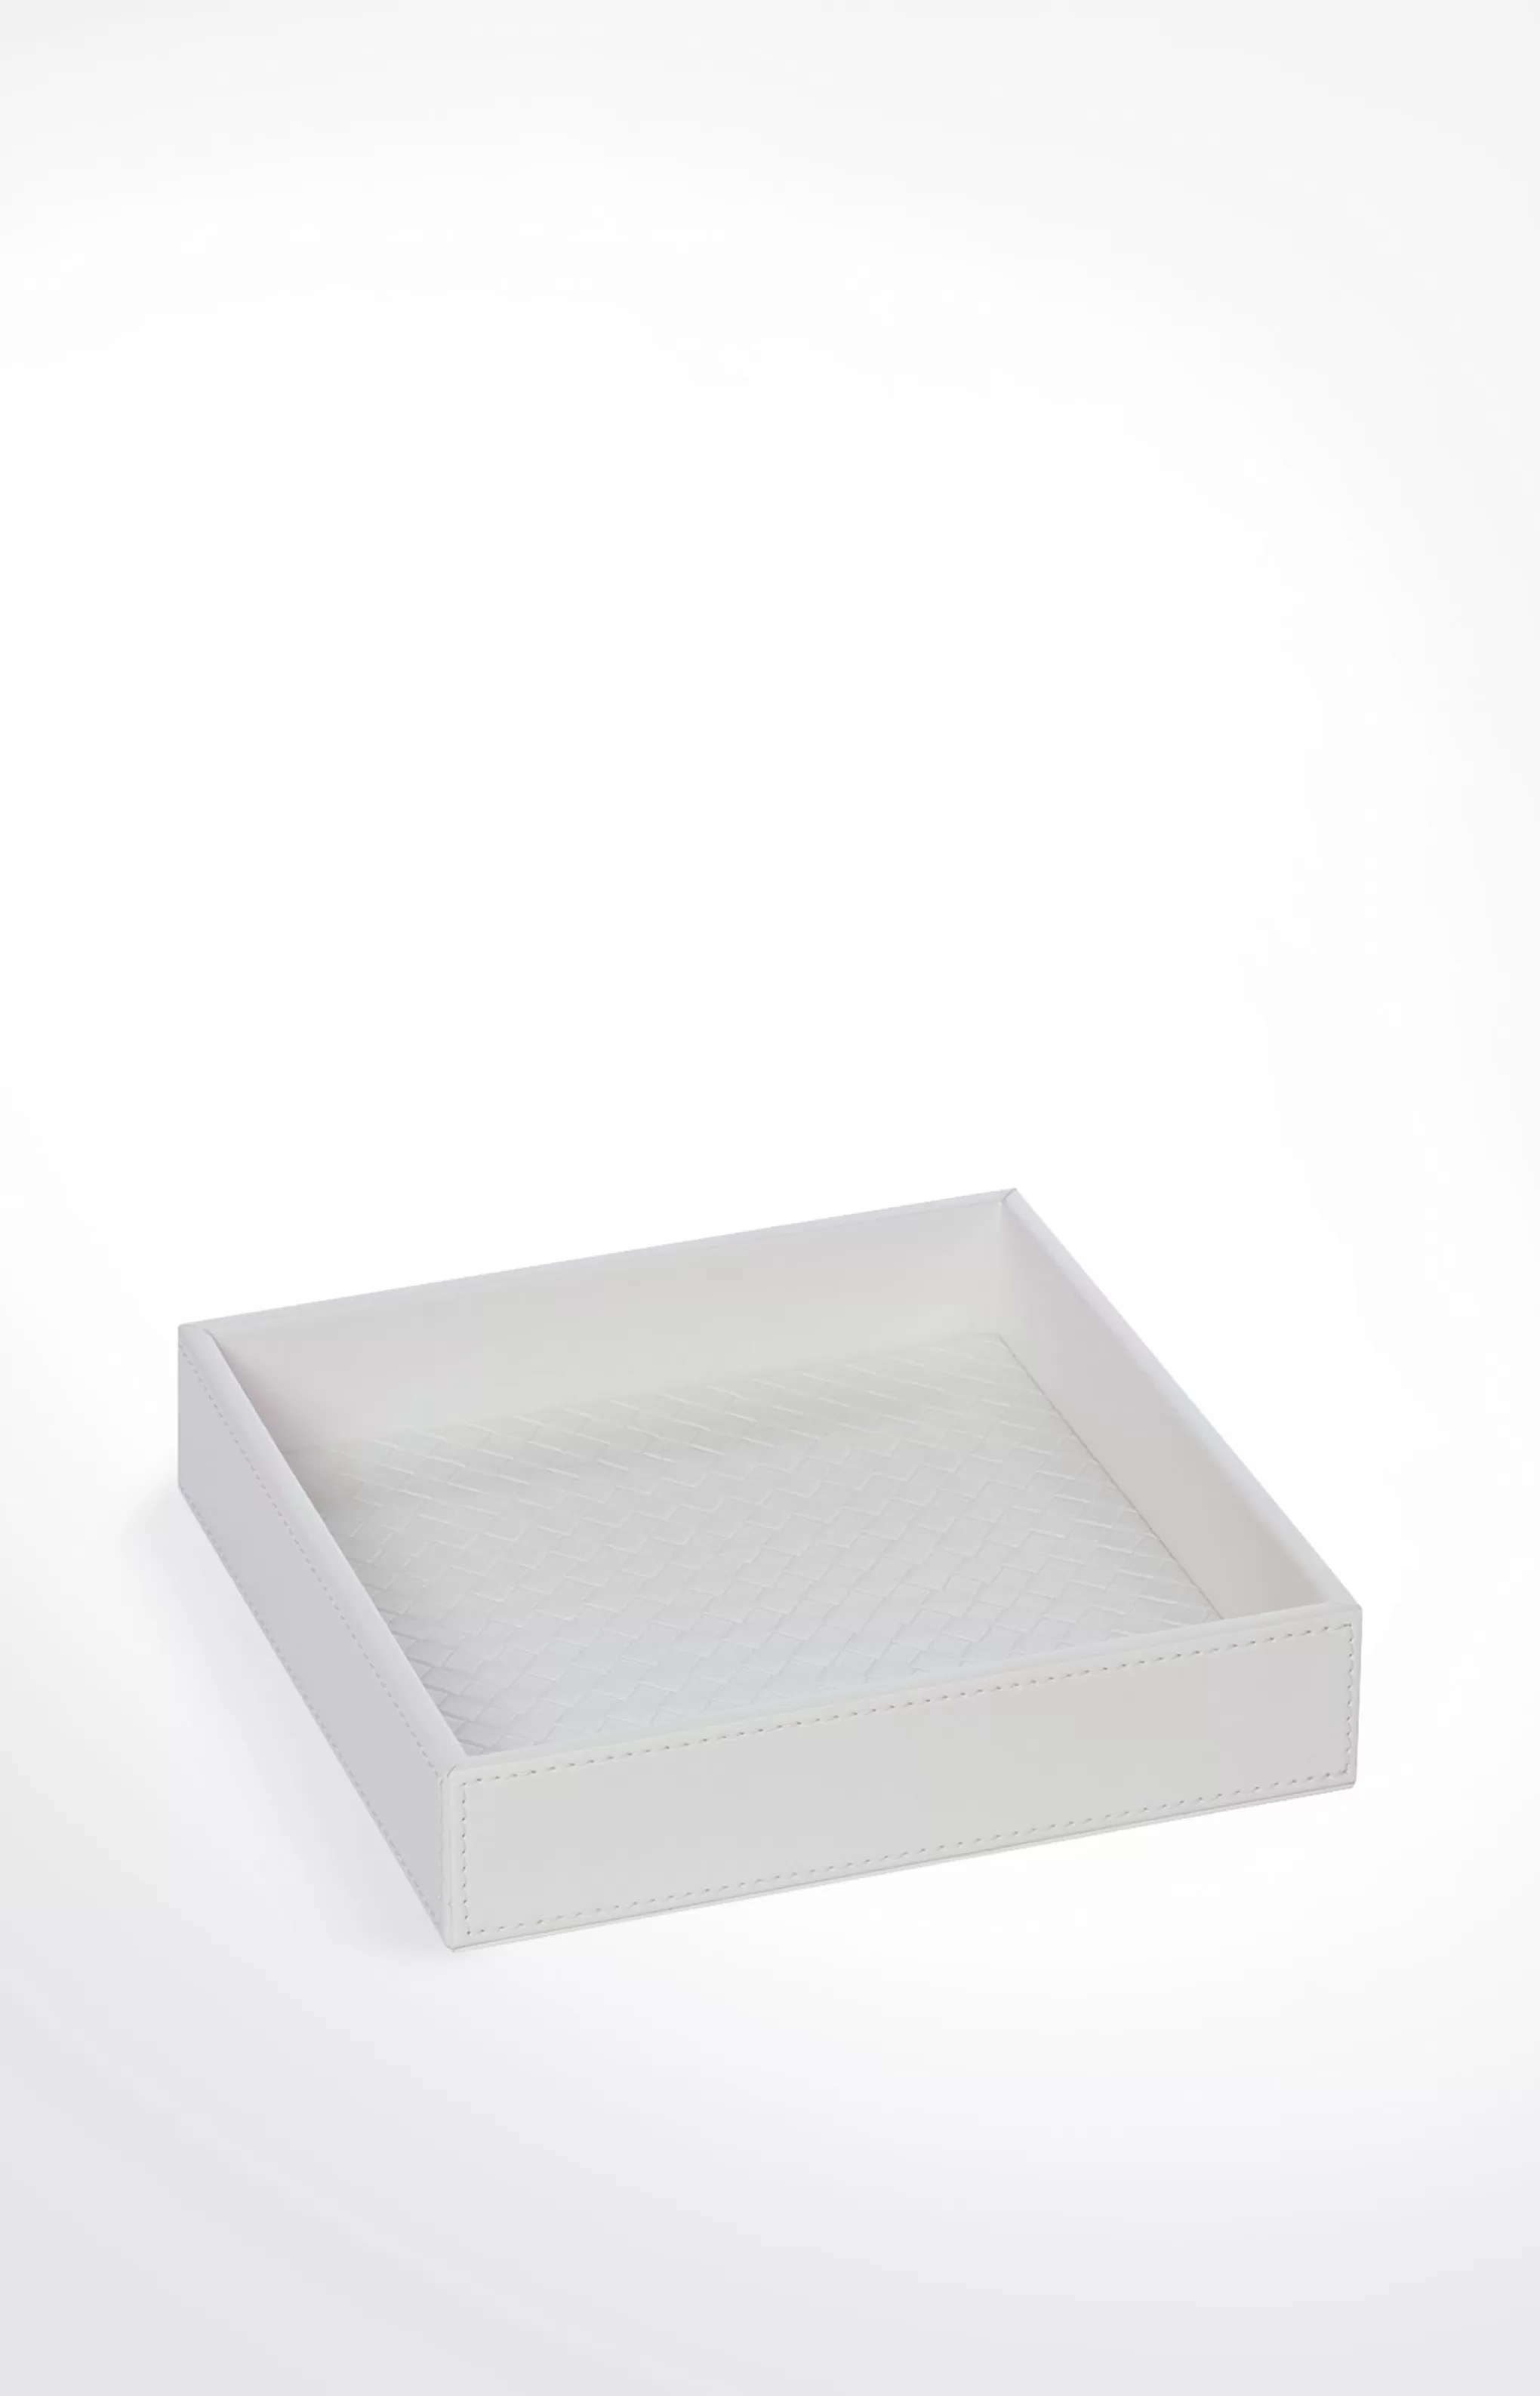 Bathroom Accessories | Discover Everything*JOOP Bathroom Accessories | Discover Everything Bathline tray,